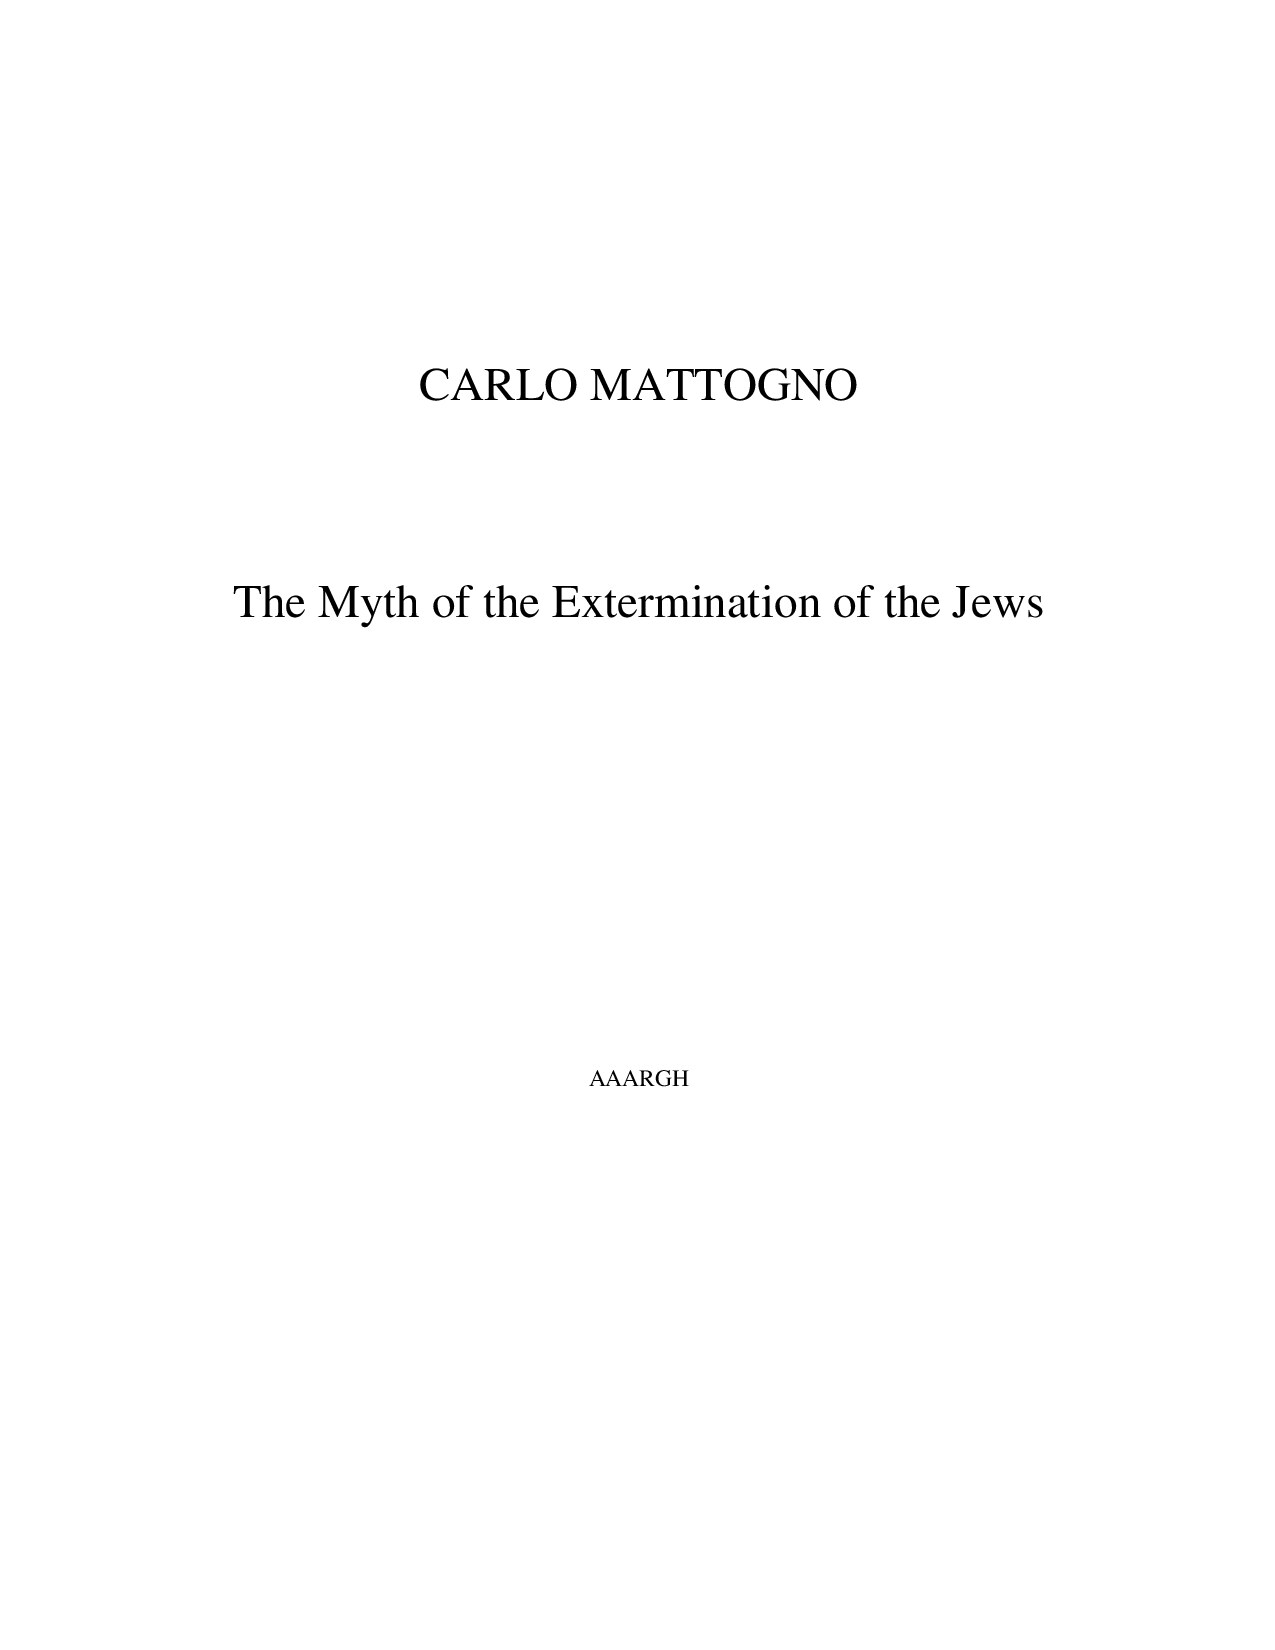 The Myth of the Extermination of the Jews